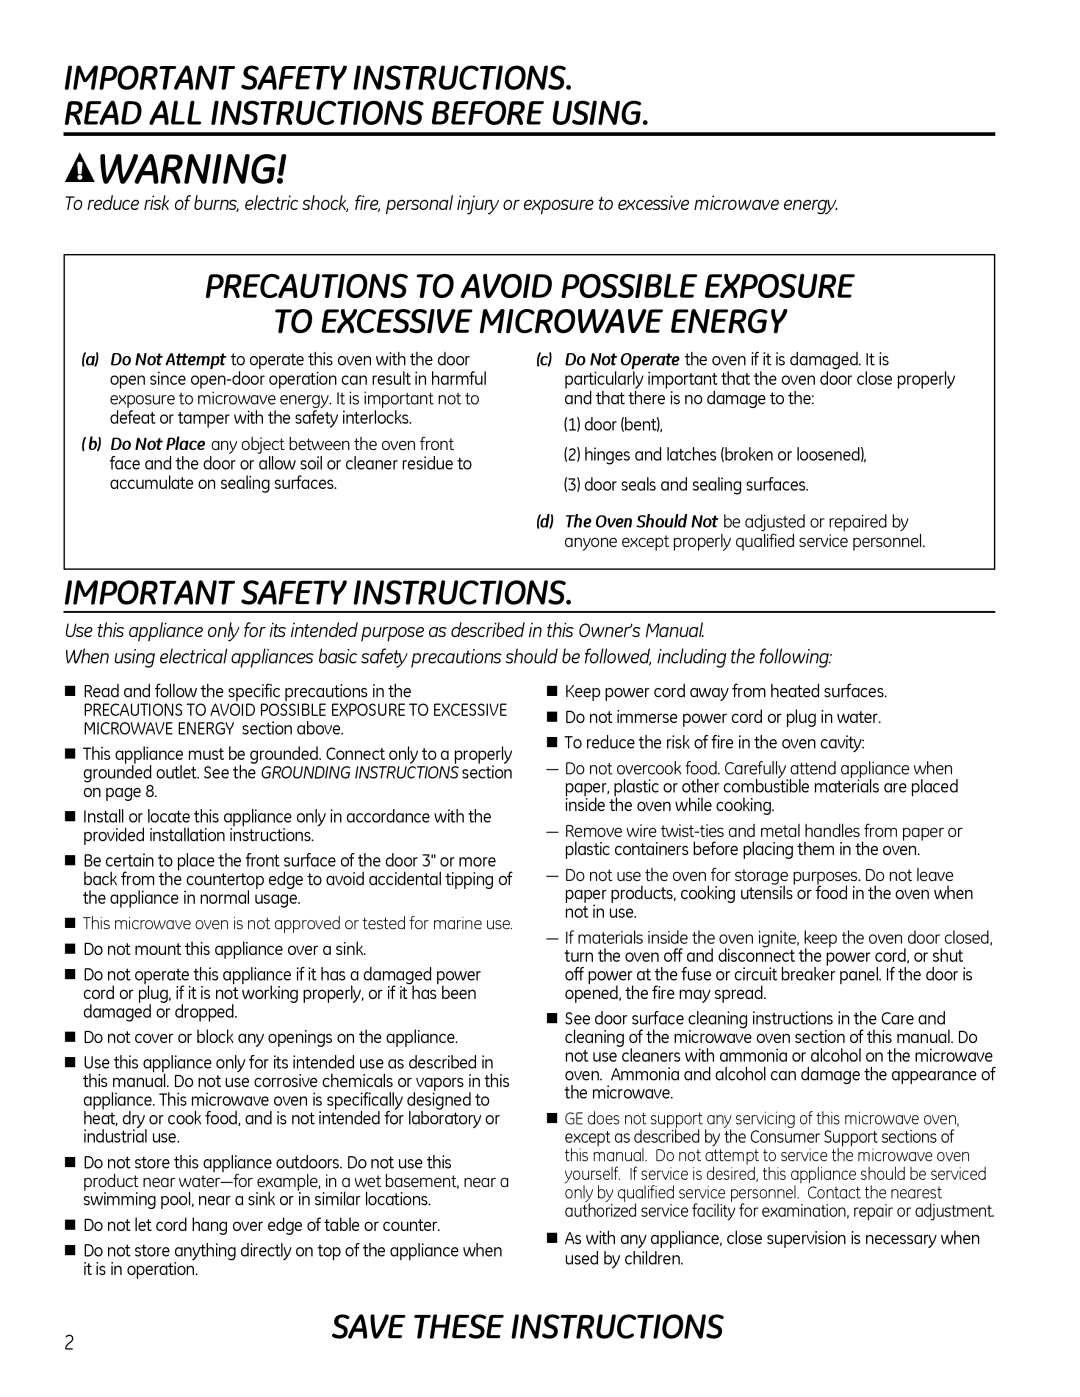 GE Microwave Oven Important Safety Instructions, Read All Instructions Before Using, To Excessive Microwave Energy 